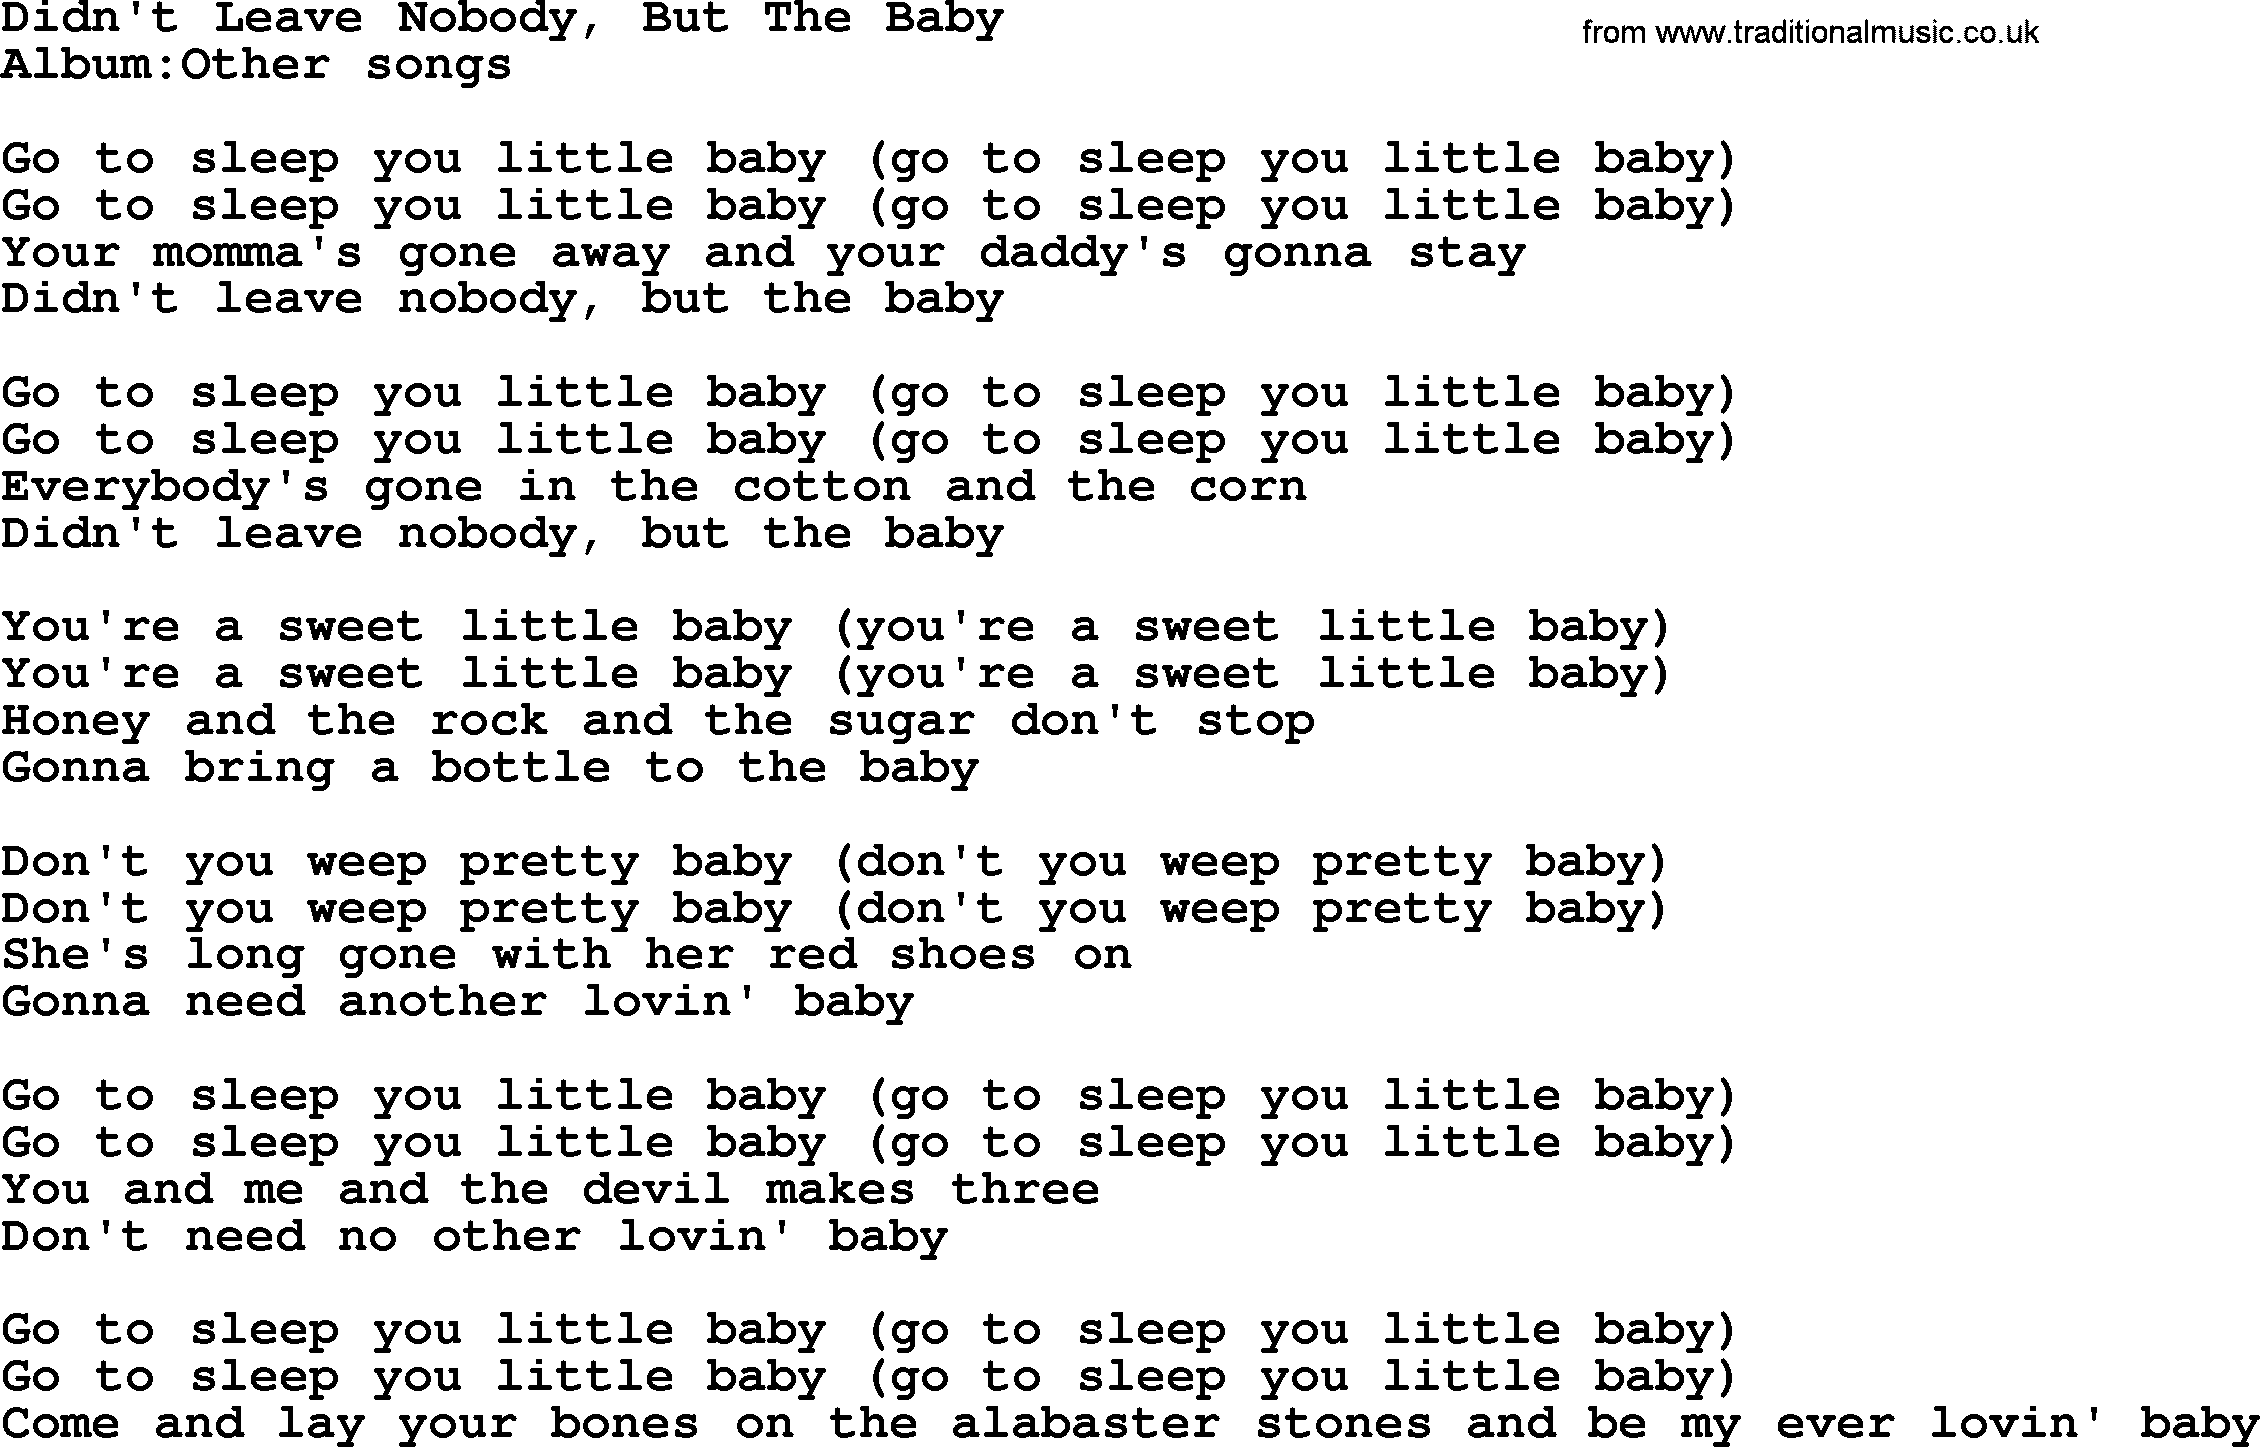 Emmylou Harris song: Didn't Leave Nobody, But The Baby lyrics